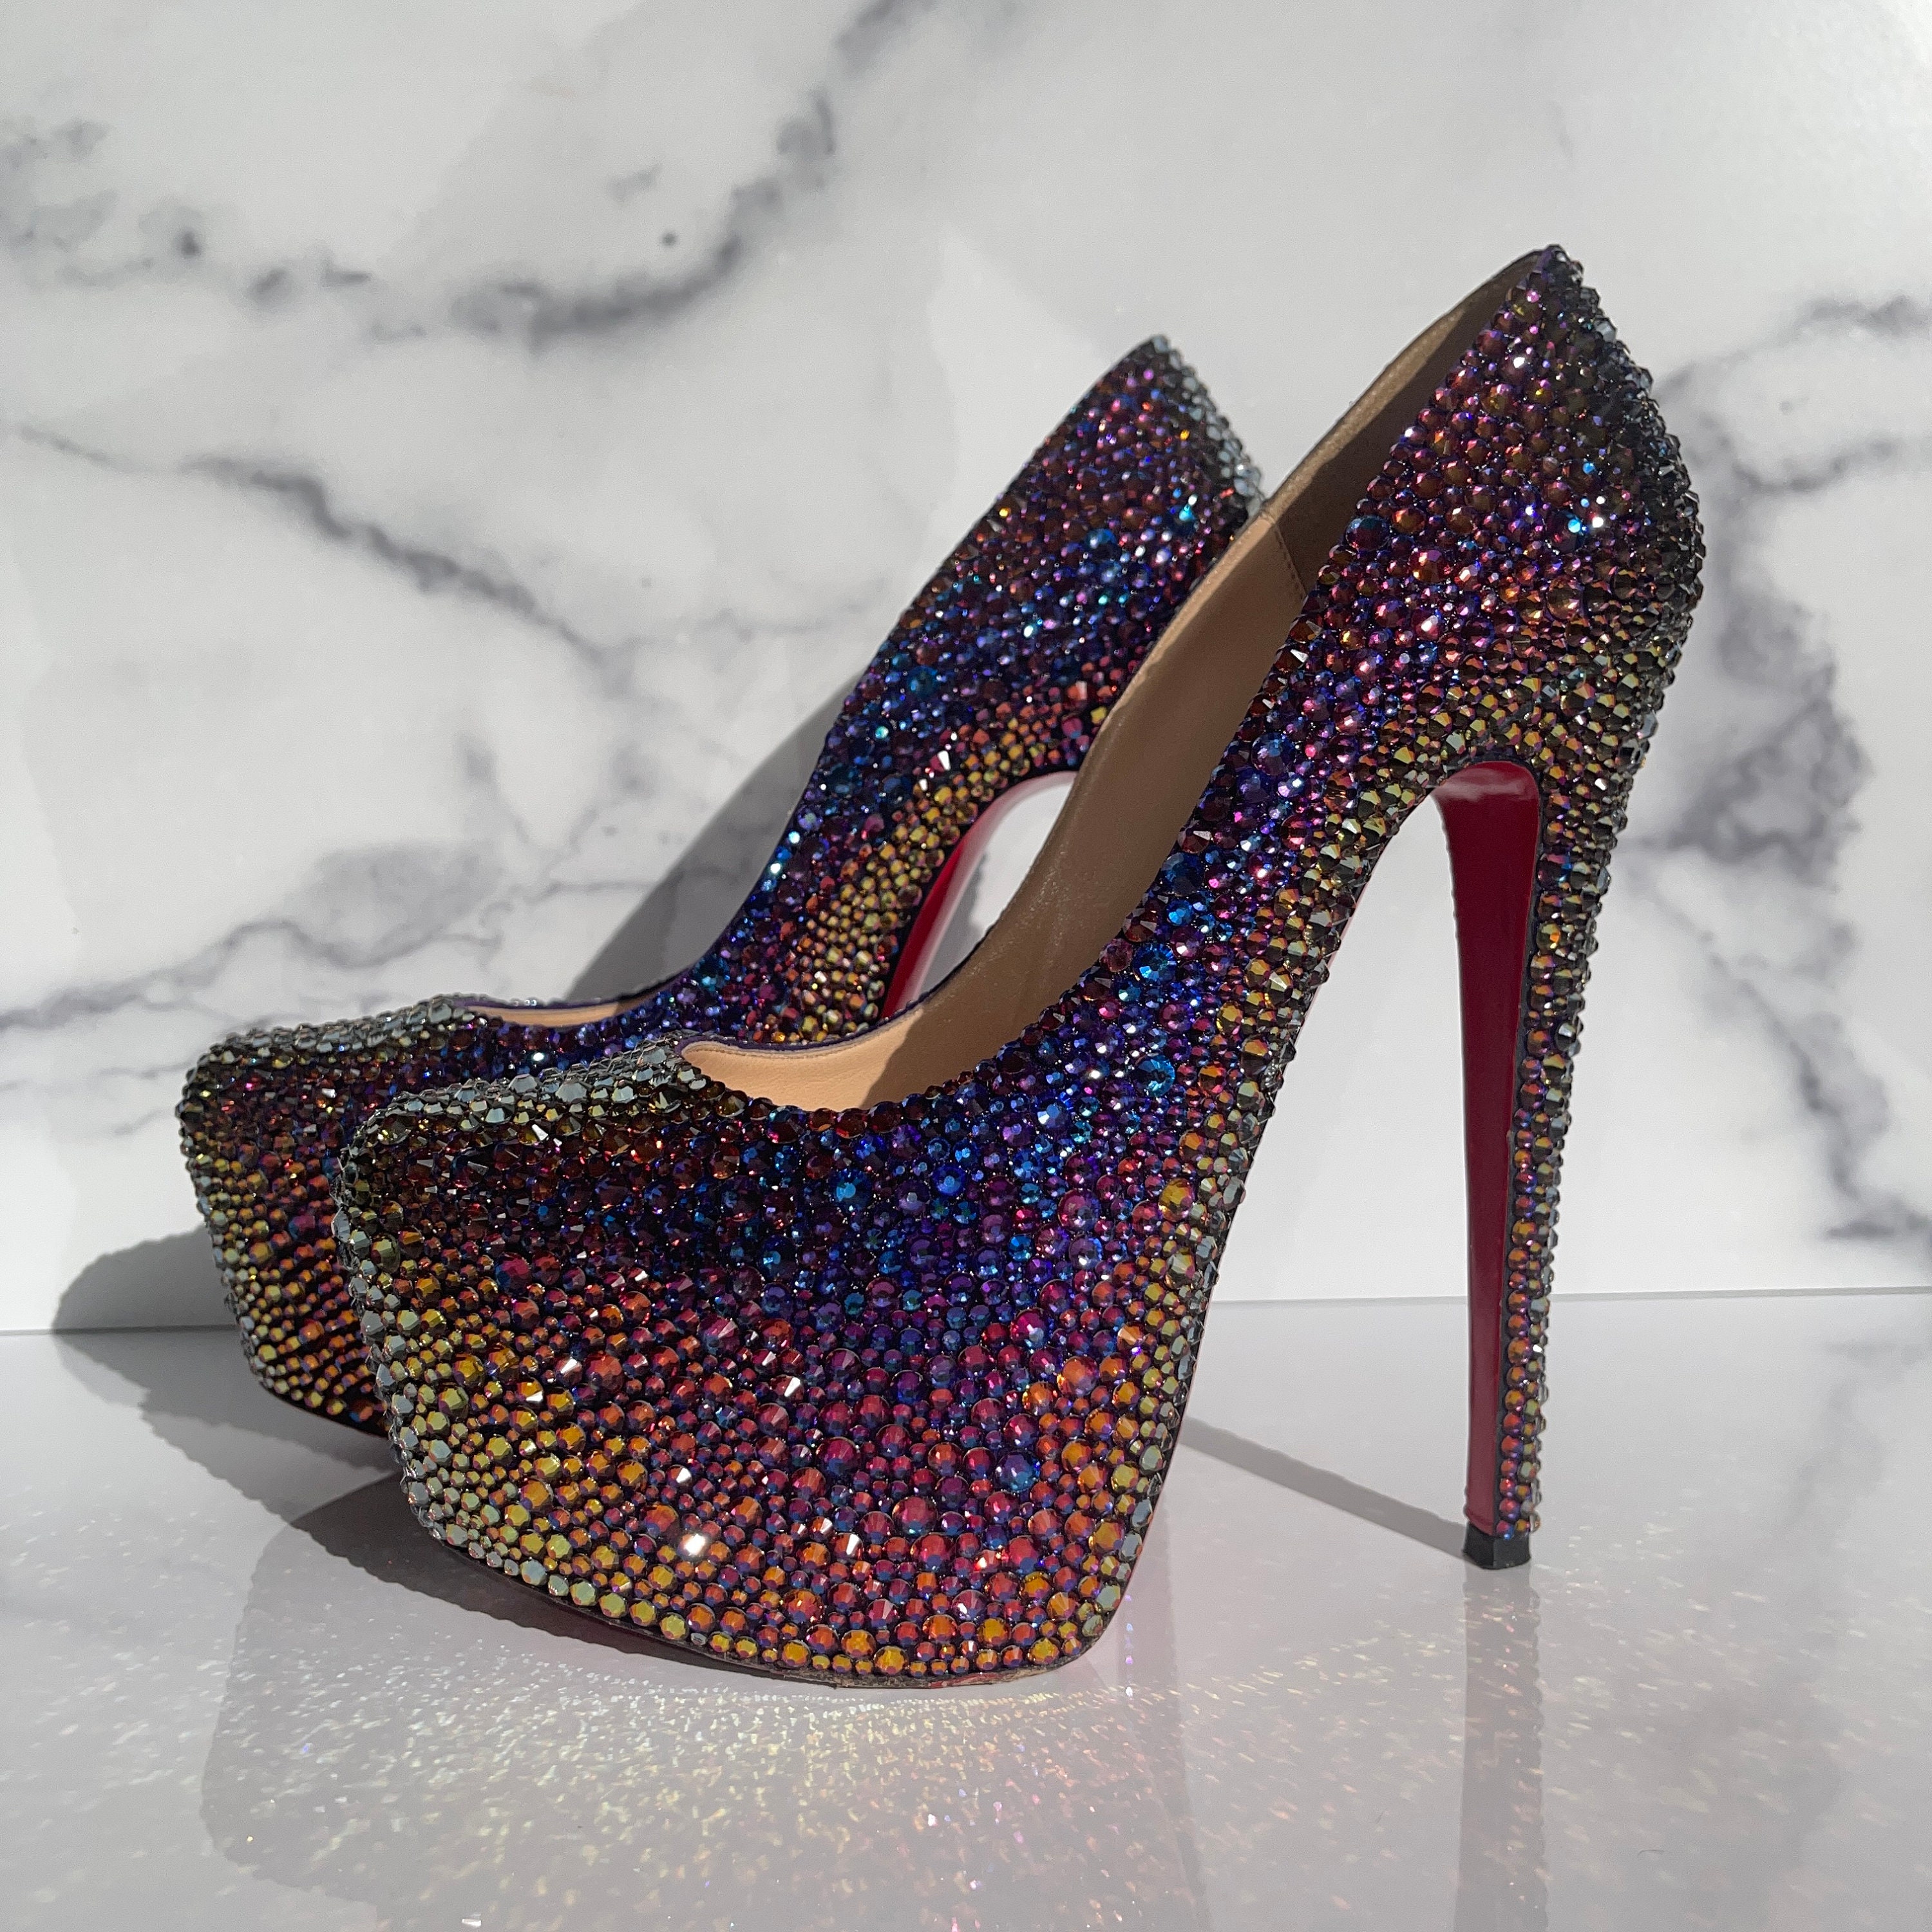 Christian Louboutin Strass Crystal Shoes 38 Size 5 Wedding Shoes. Never worn